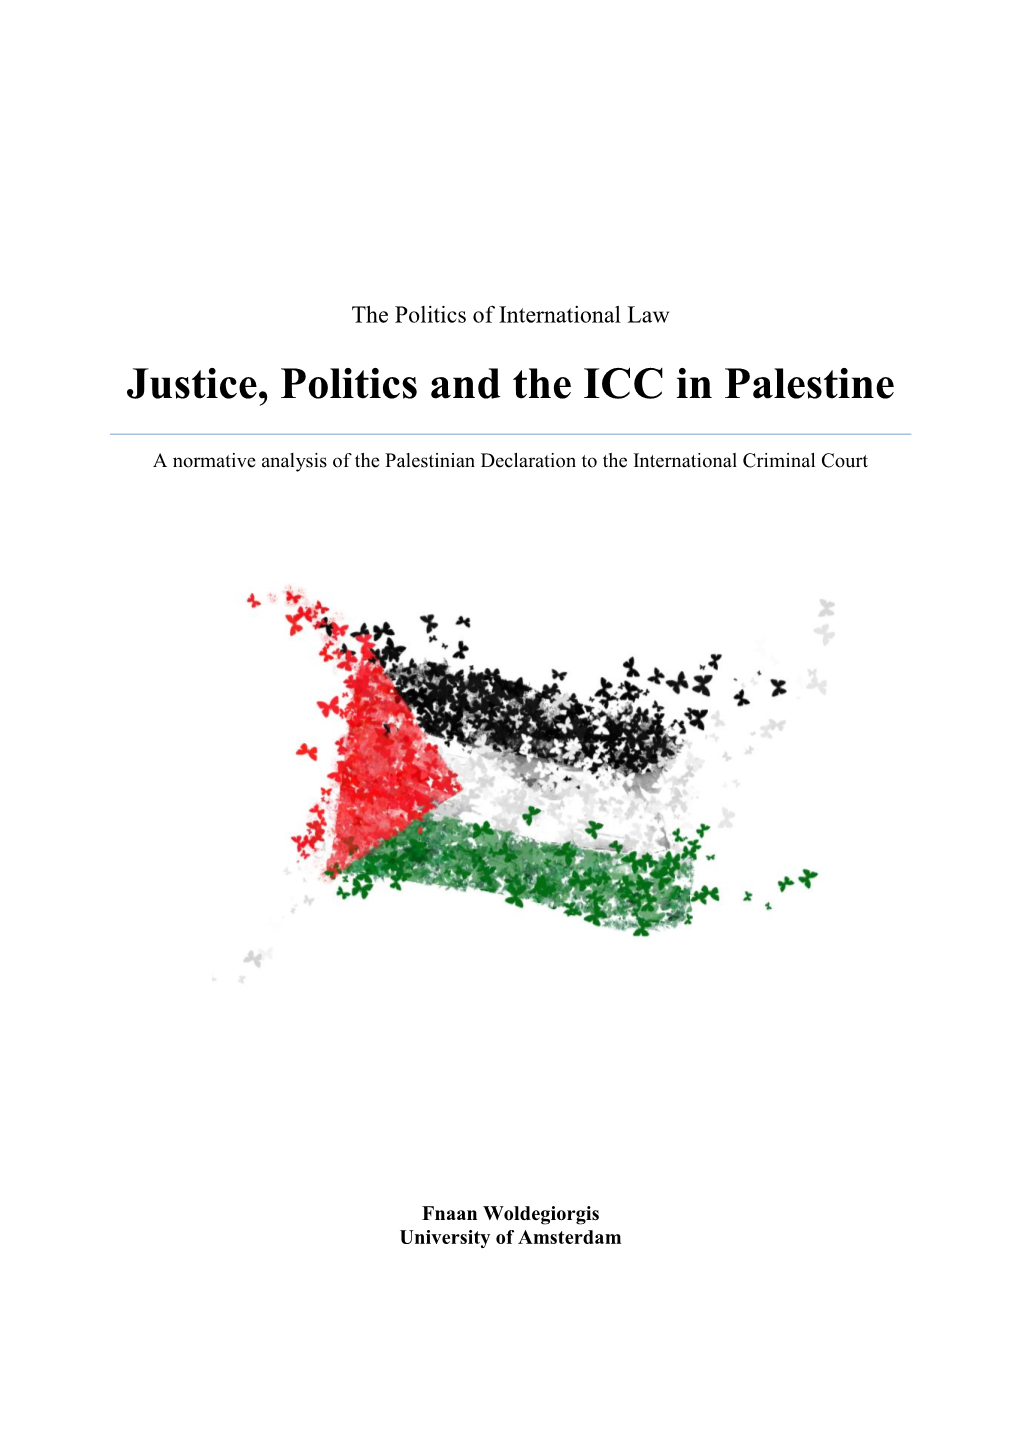 Justice, Politics and the ICC in Palestine